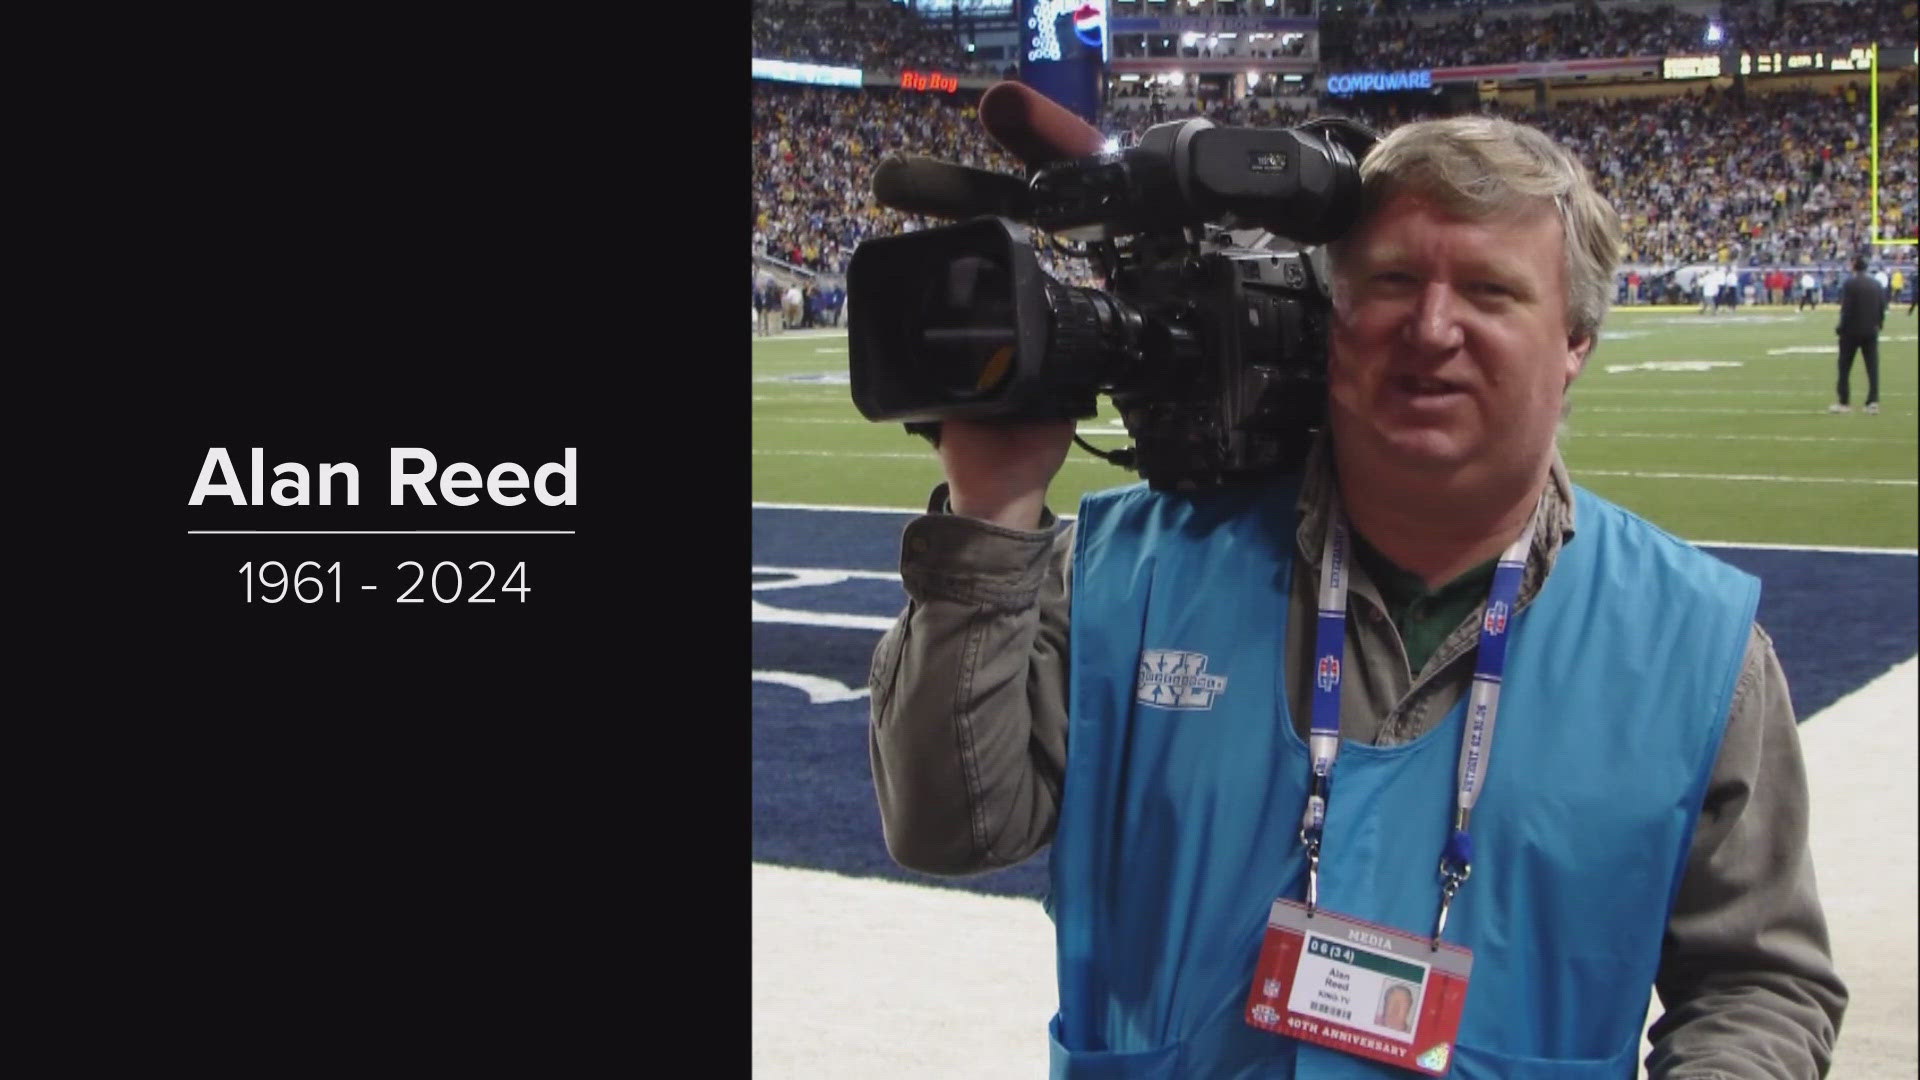 Alan Reed covered it all, from professional sports to high school games. Athletes, coaches and colleagues share their memories of Alan with KING 5 Sports.